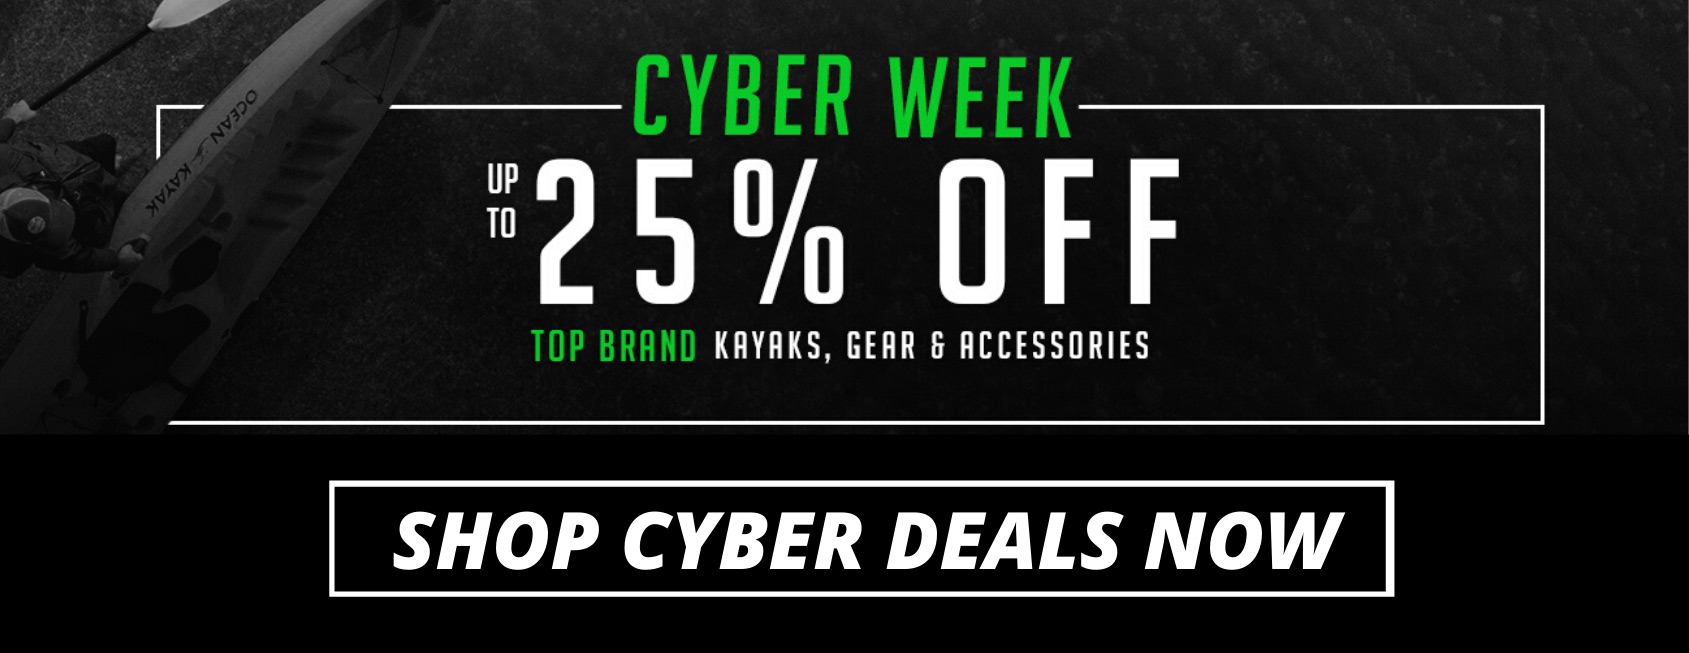 Cyber Week Up To 25% Off